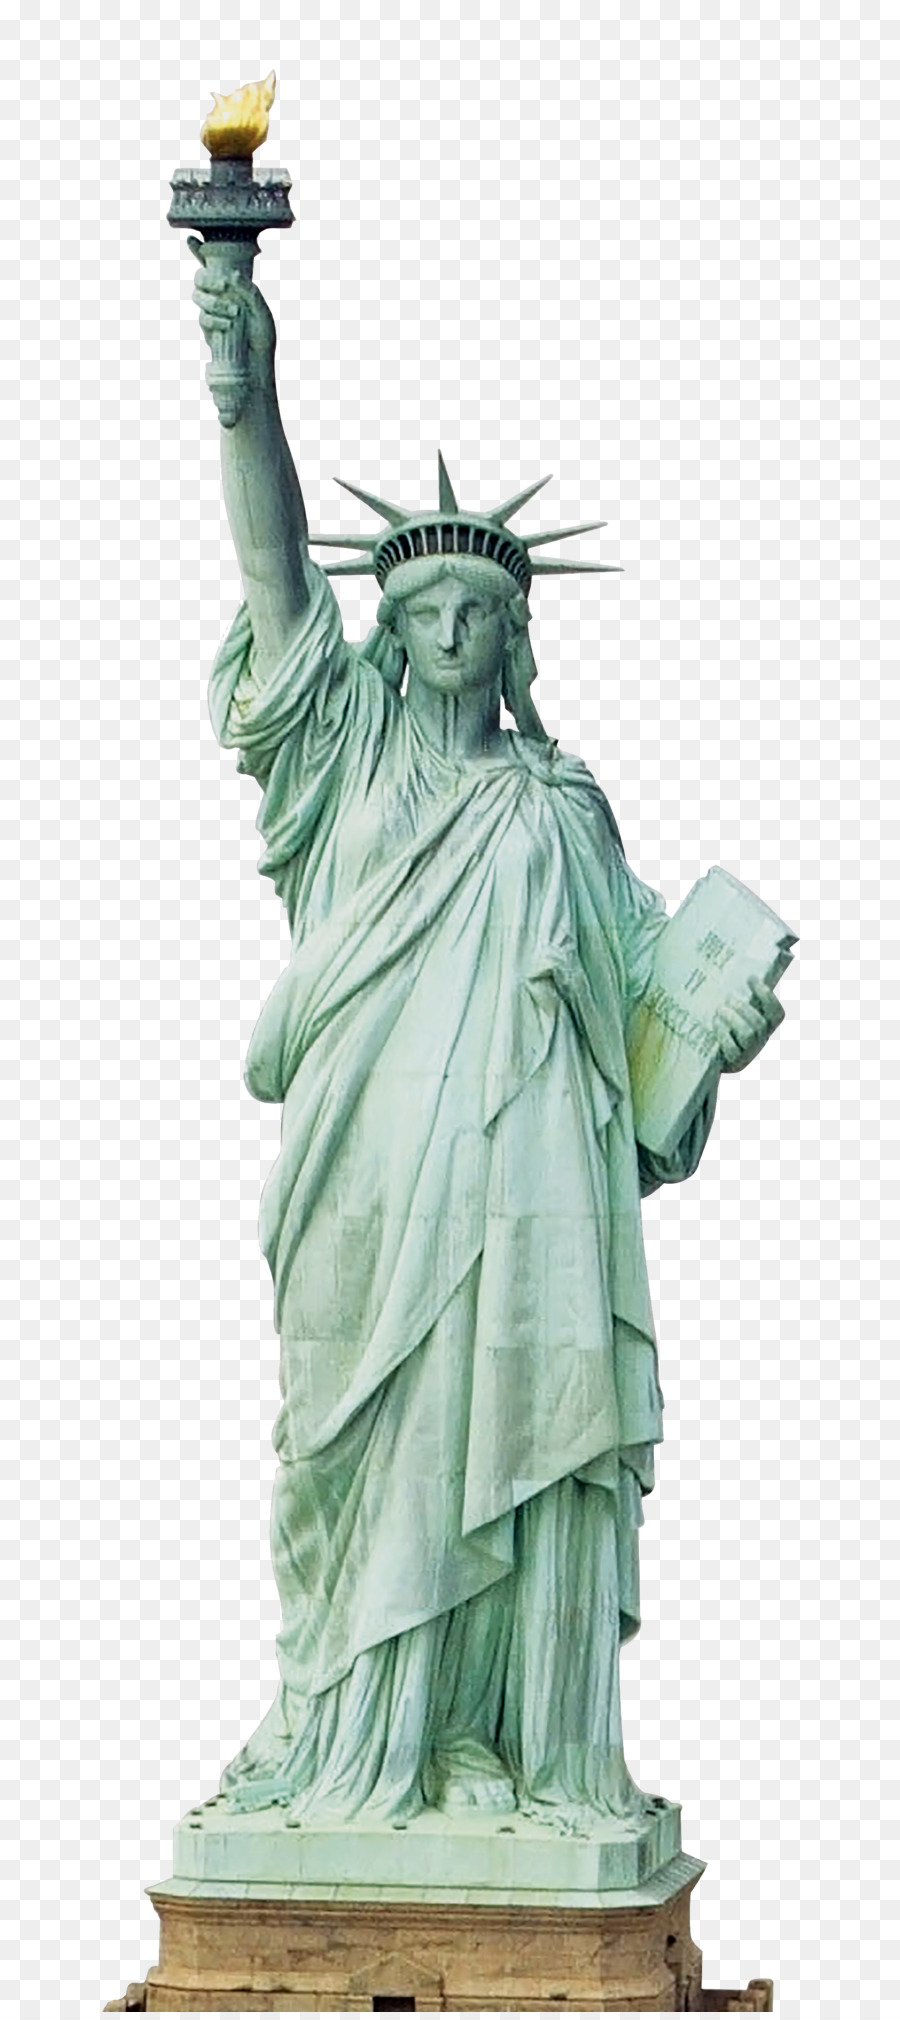 Statue of Liberty New York Harbor Staten Island Ferry Colossus of Rhodes The New Colossus - Statue of Liberty Transparent Background png download - 1846*4127 - Free Transparent Statue Of Liberty png Download.